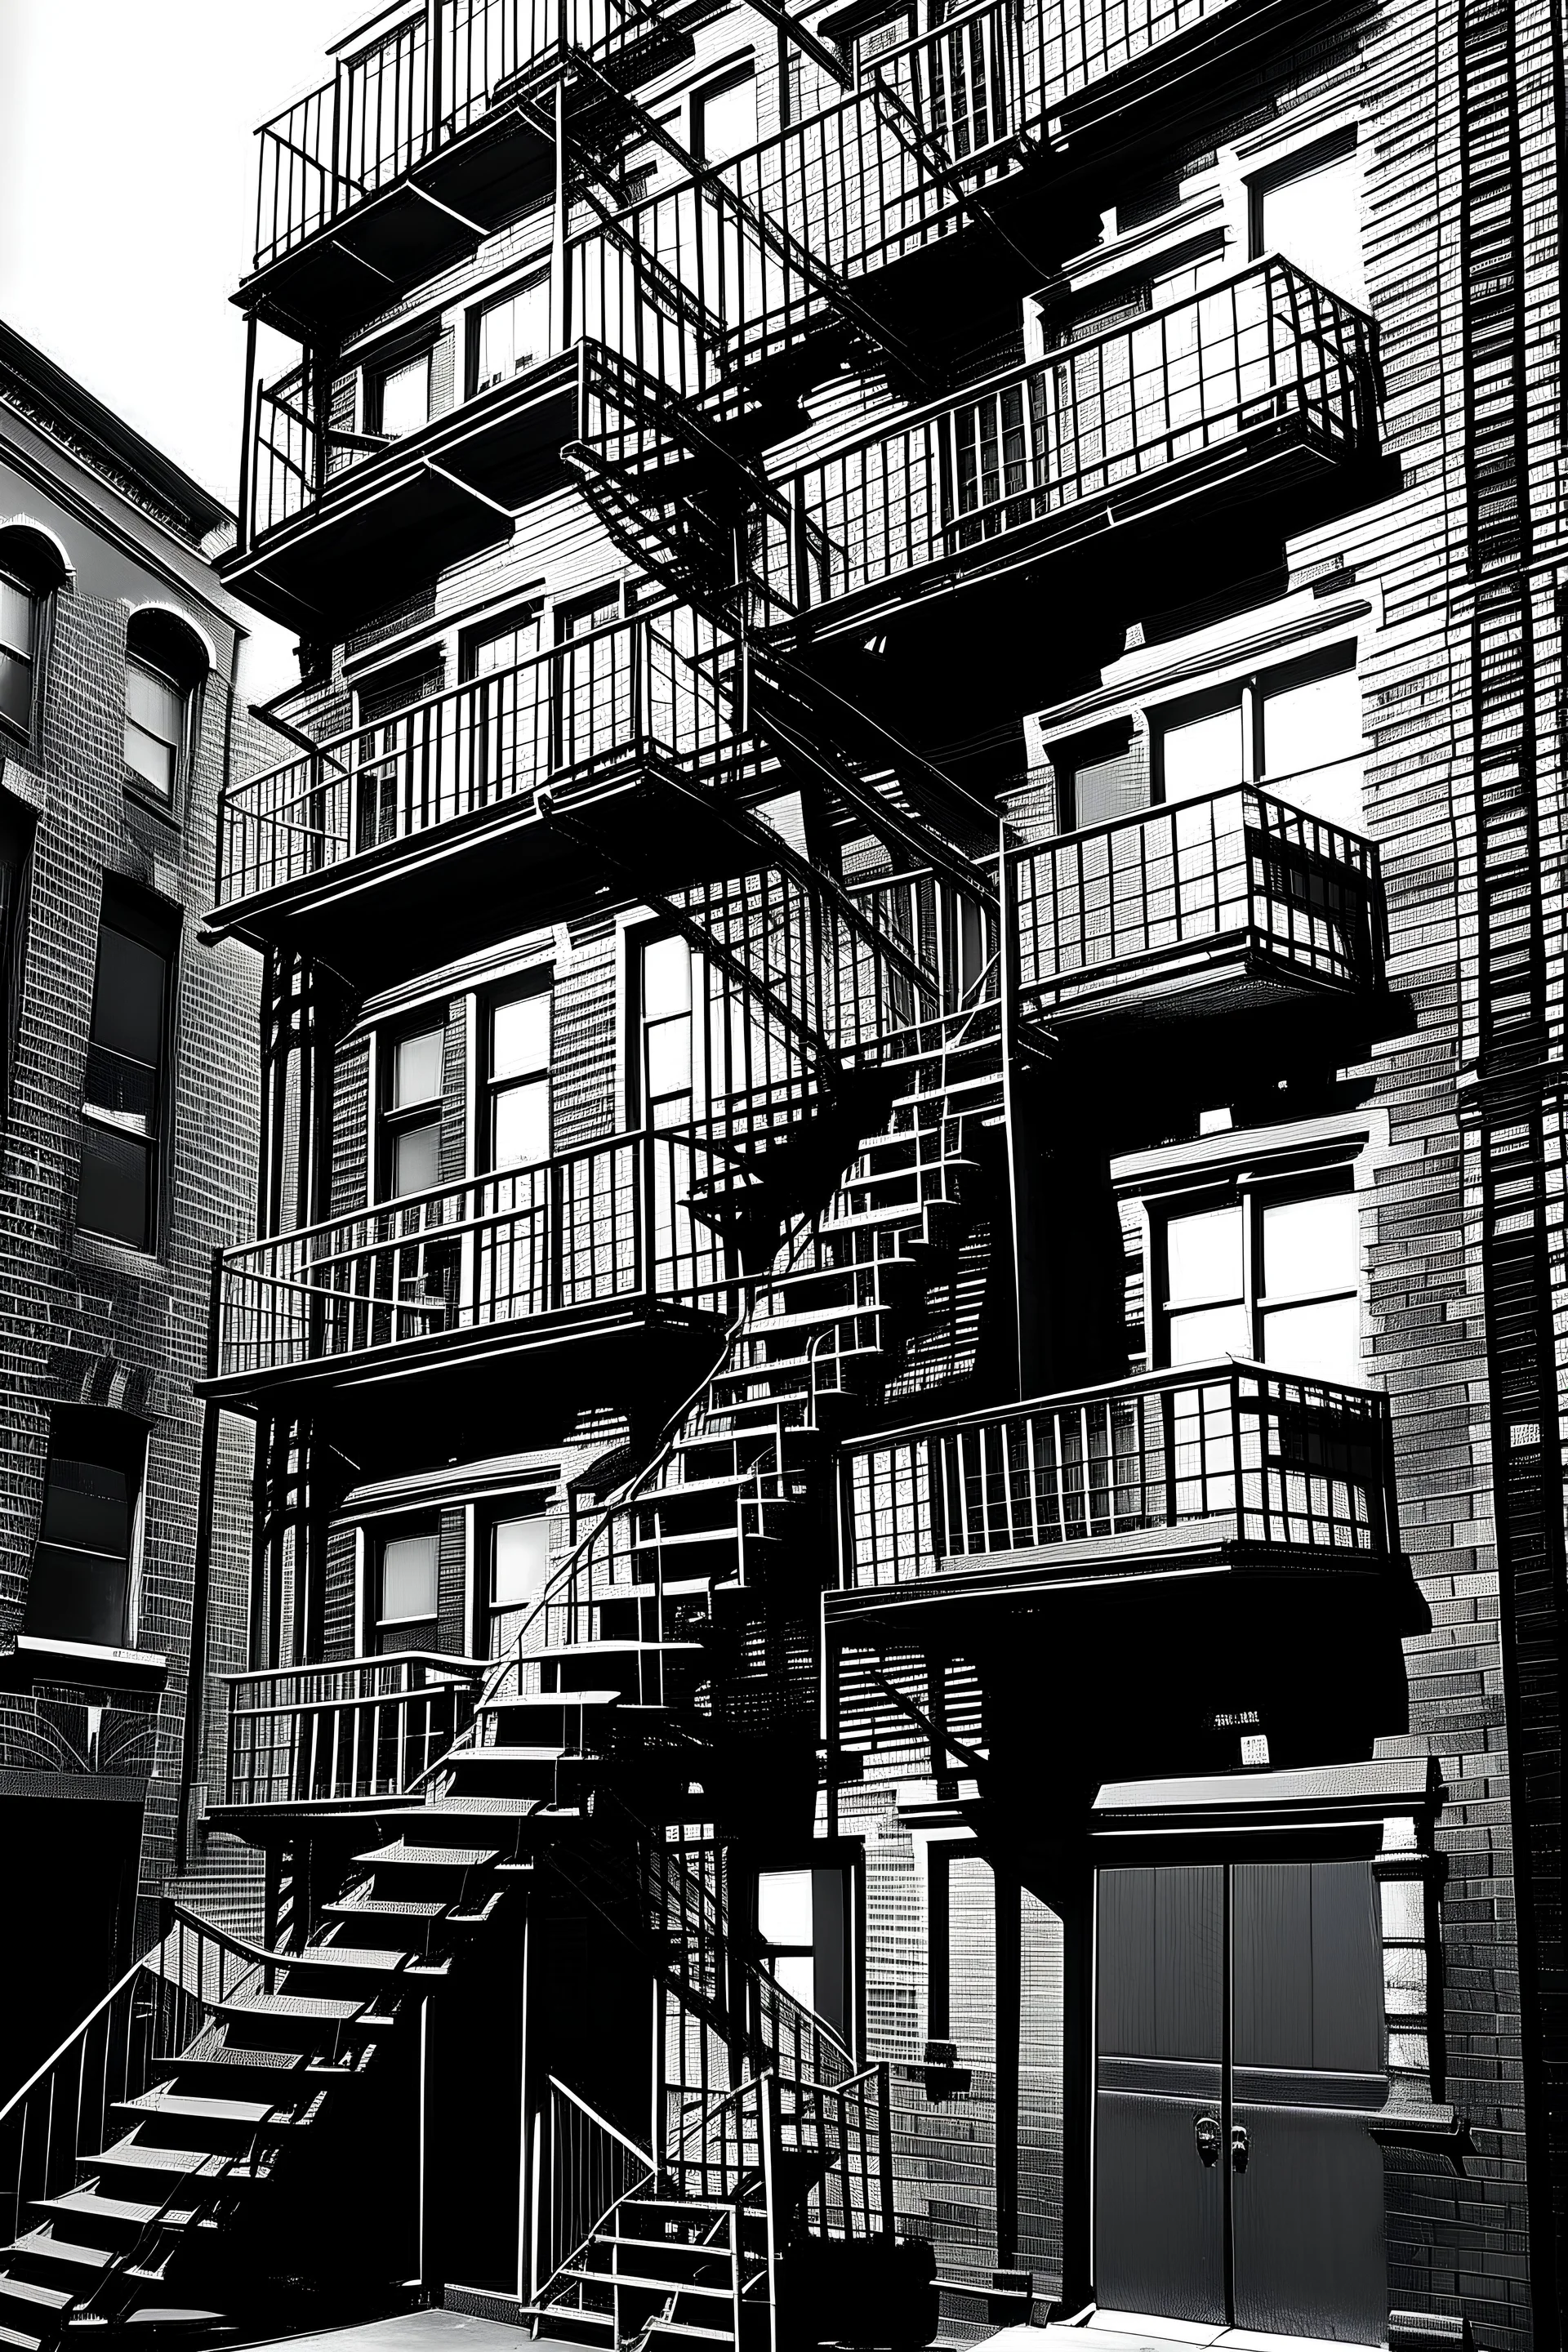 Typical New York fire escape ladders，there is a decorative room shelf which the style isTypical New York fire escape ladders.draw picture for assembly instructiongs that show the action that Put the Crossbars tiers on the wall, mark where the holes are.